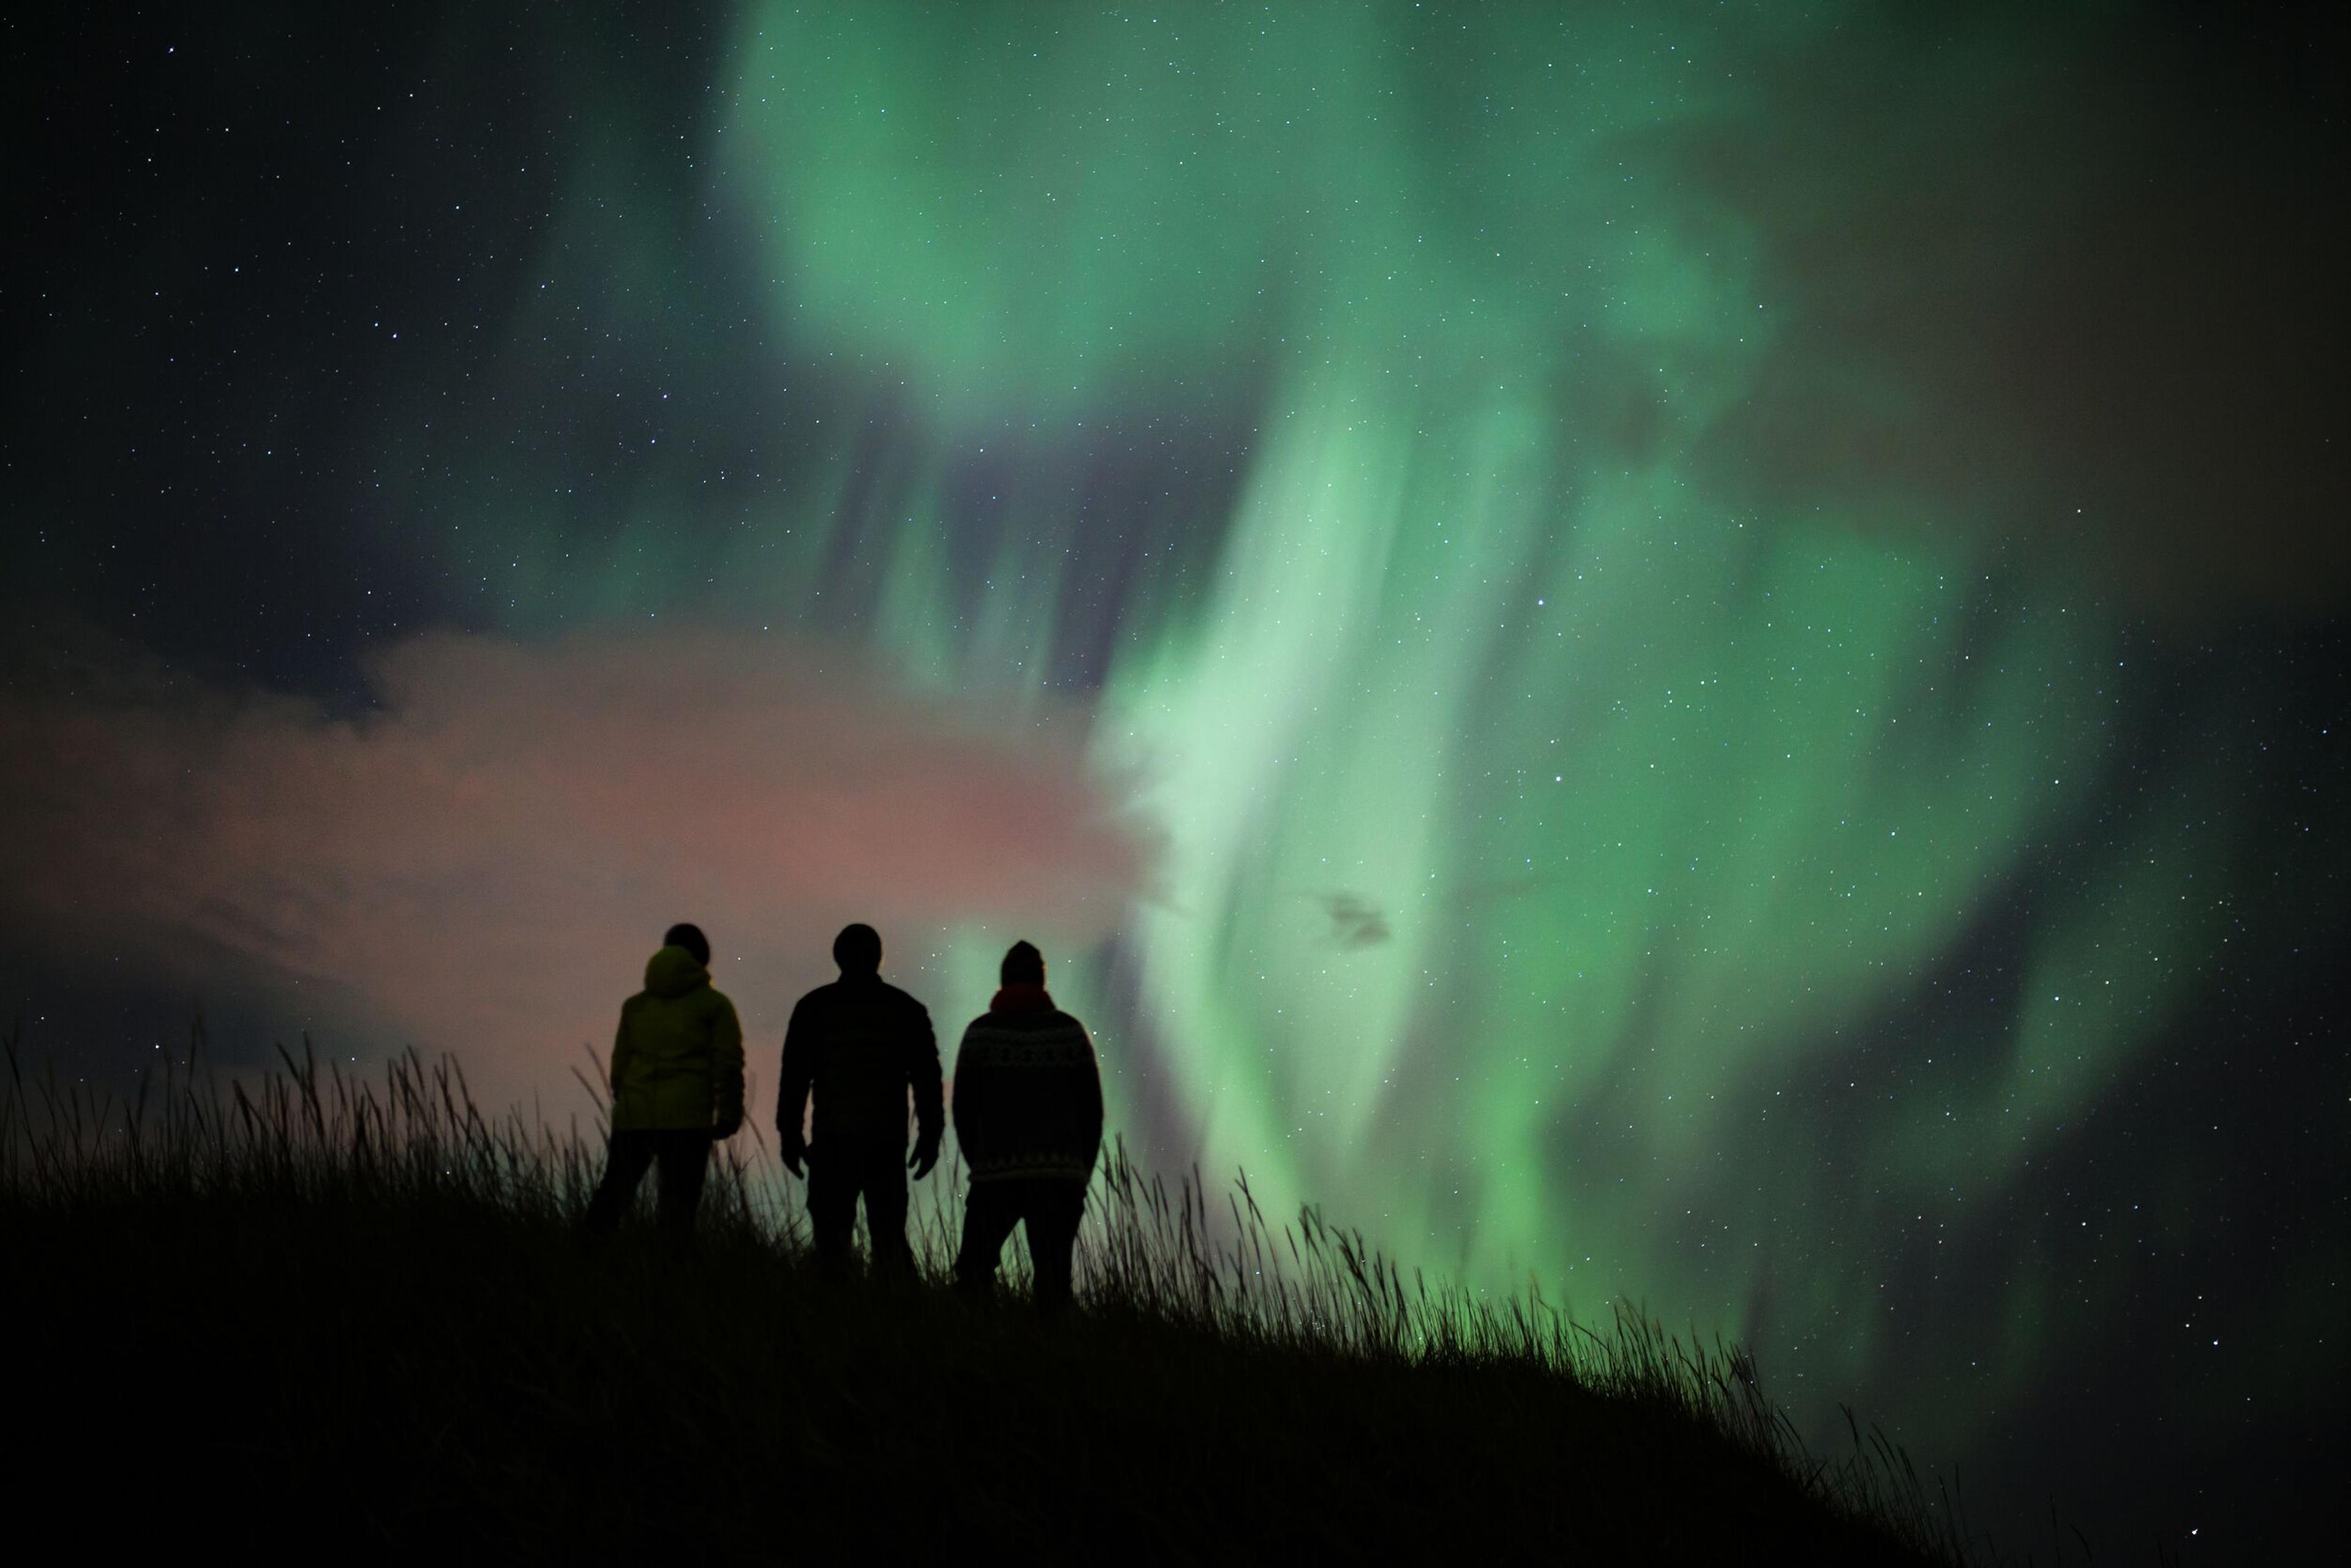 Three individuals gazing in awe at the vibrant green Northern Lights illuminating the night sky.